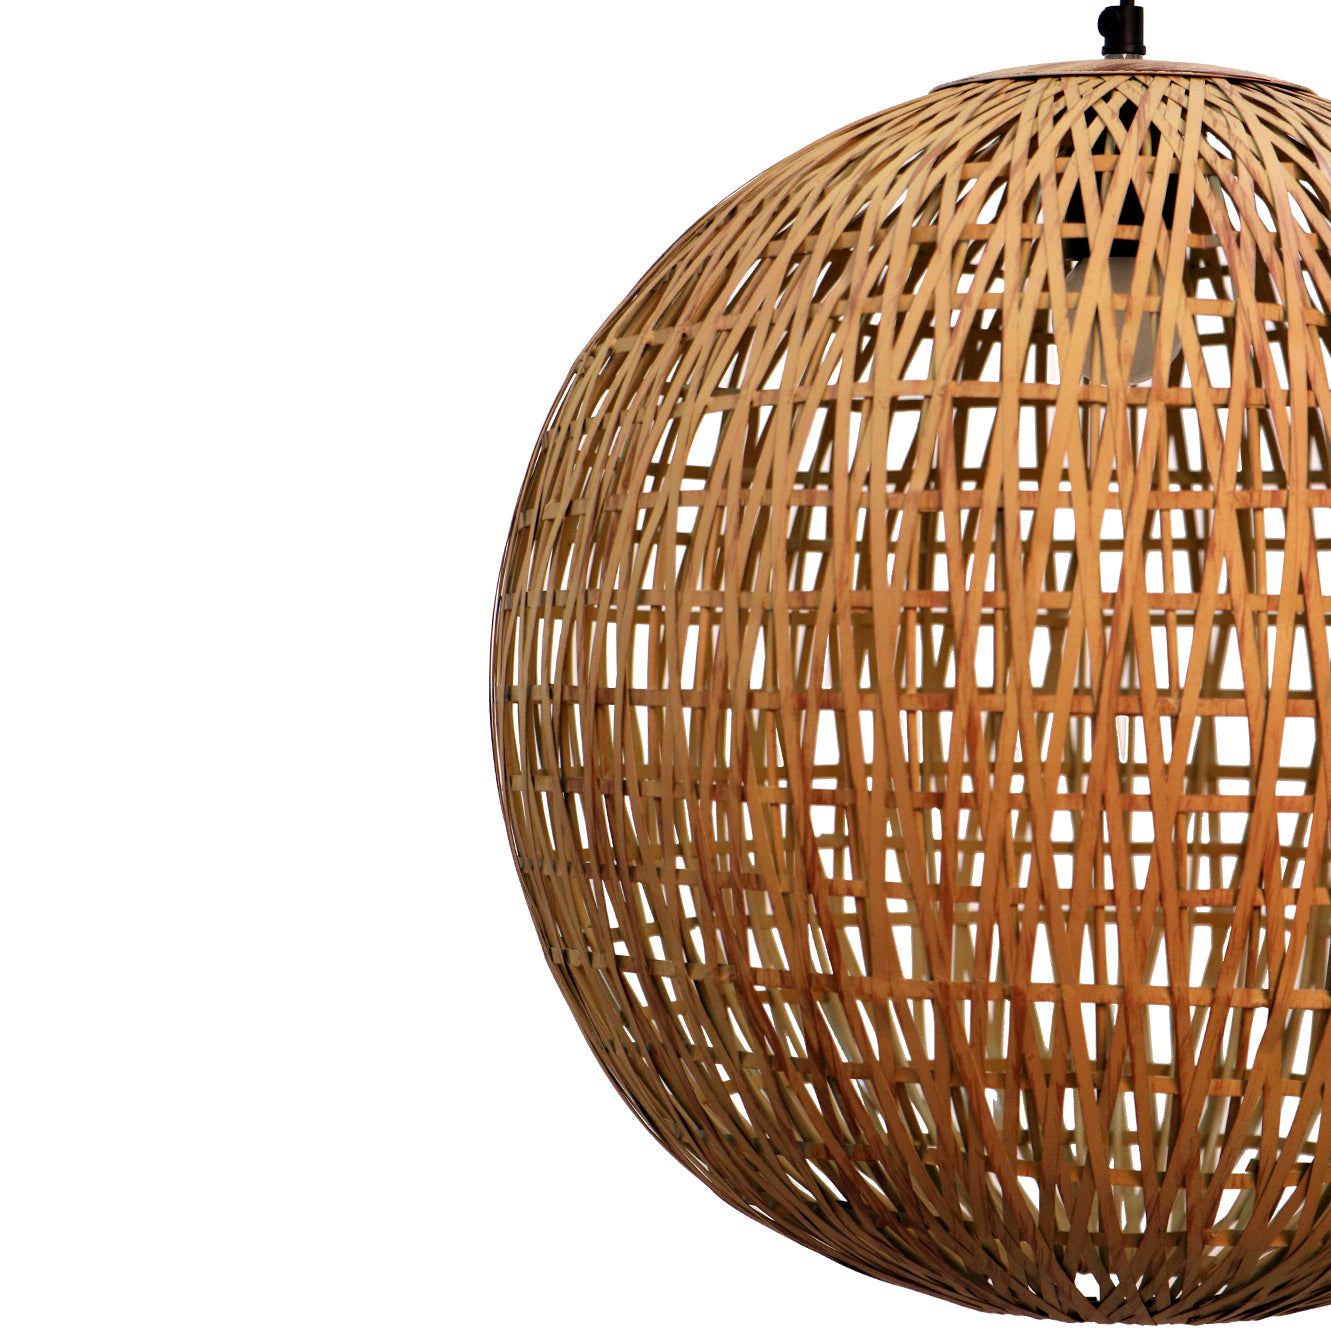 Orion Round Ball Hanging Lamp by homrblitz.in